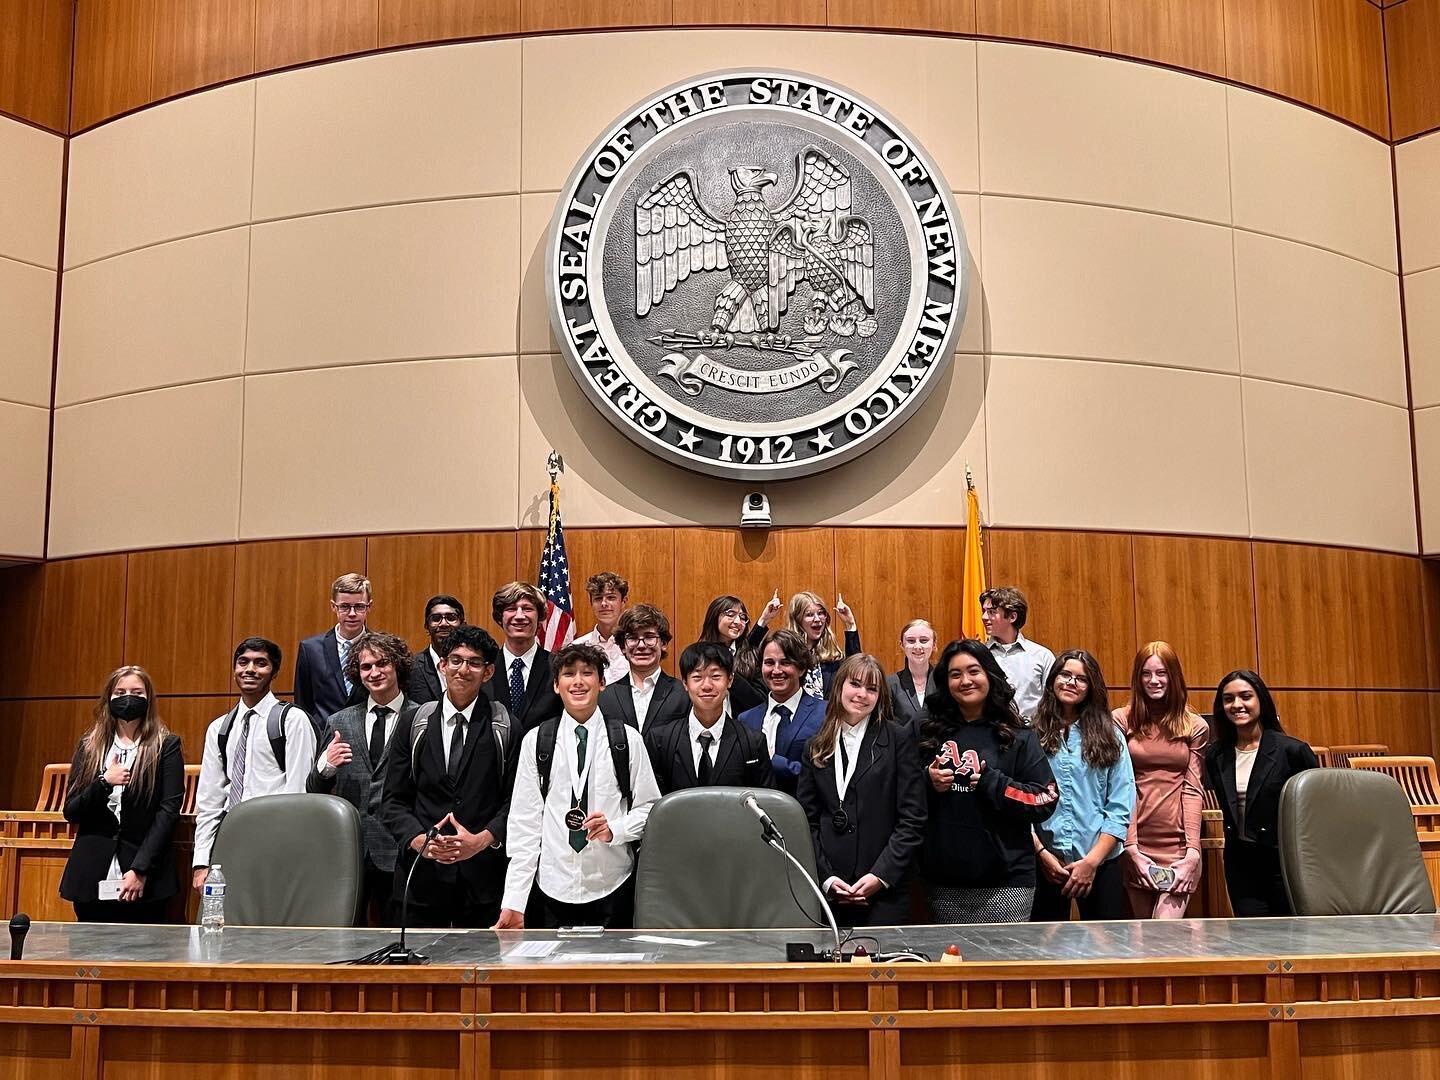 After a long hiatus, the Albuquerque Academy Speech &amp; Debate Instagram is BACK! 🏆

Congrats to the 21 students who competed last week at this year&rsquo;s first NMSDA season opener: Capitol Congress at the Santa Fe Roundhouse. 

Full results ava